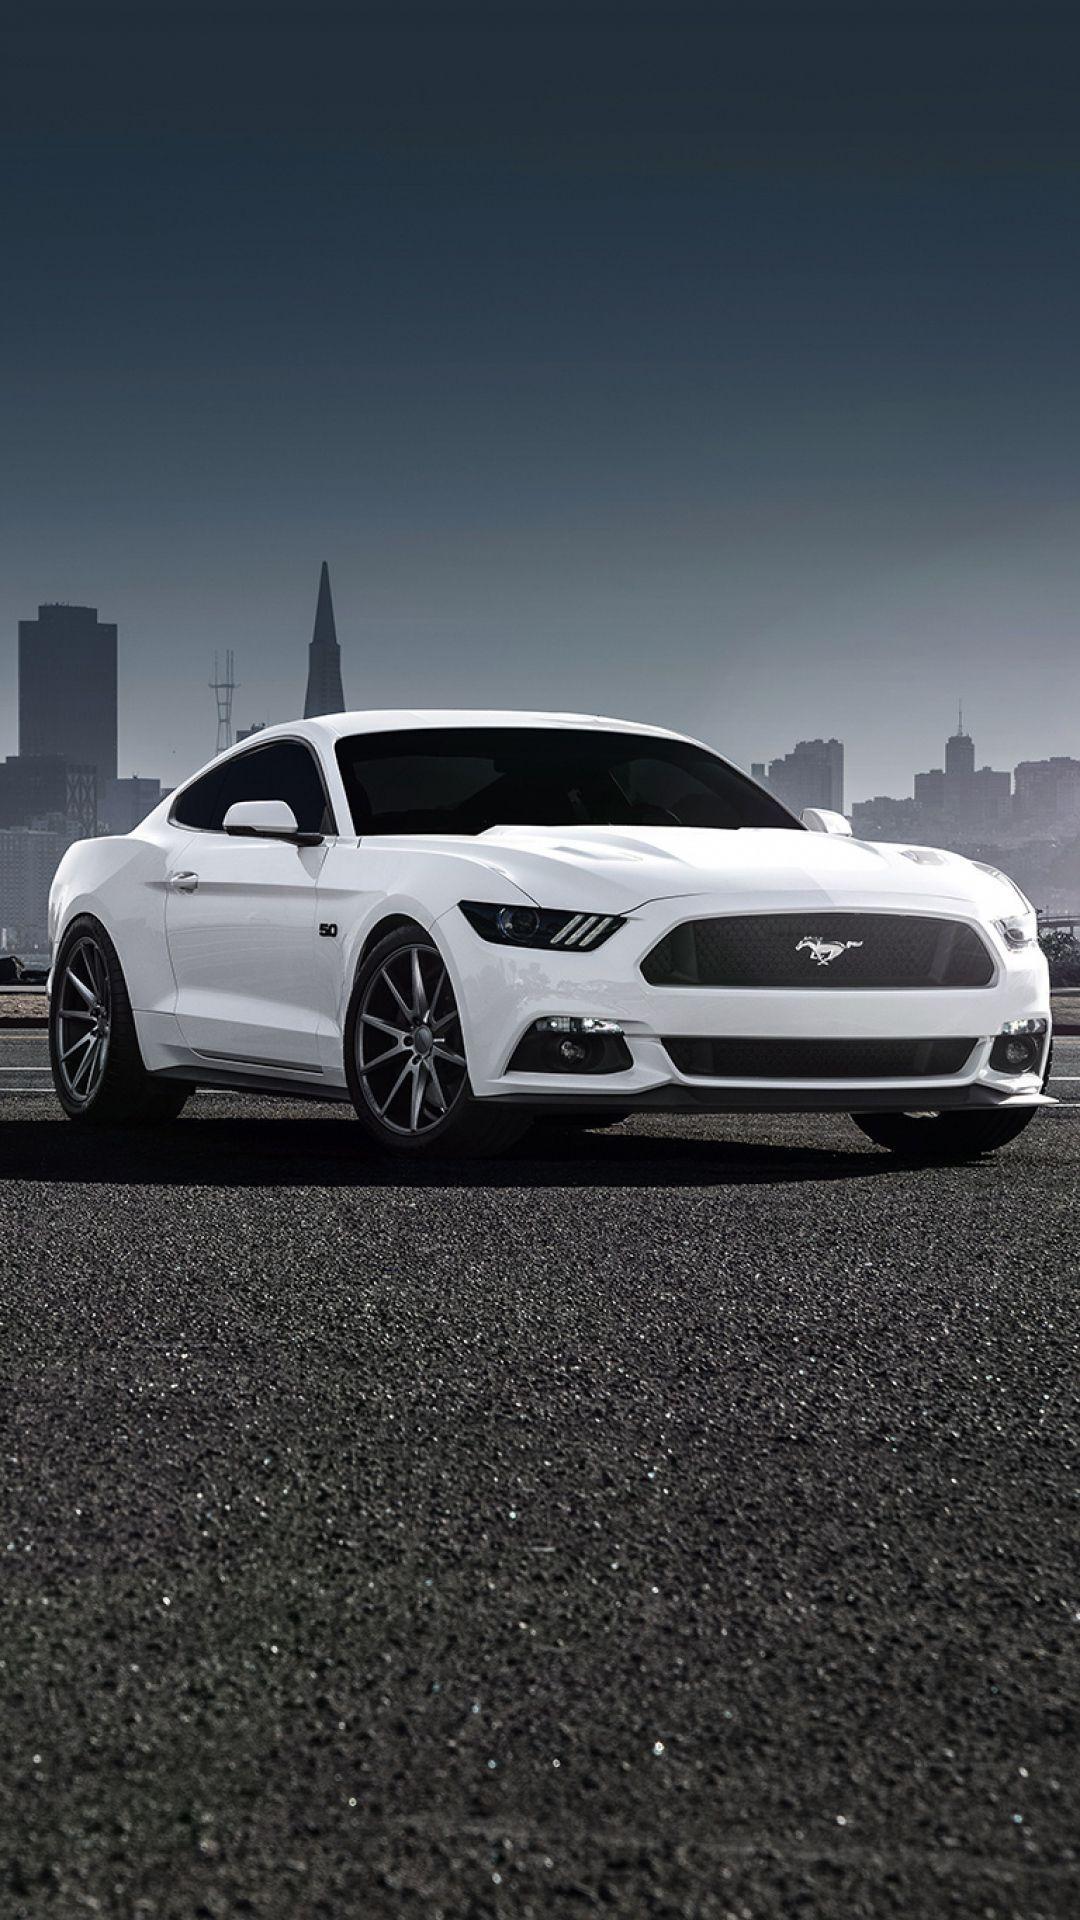 30+ 2015 Ford Mustang Gt Wallpaper Iphone HD download